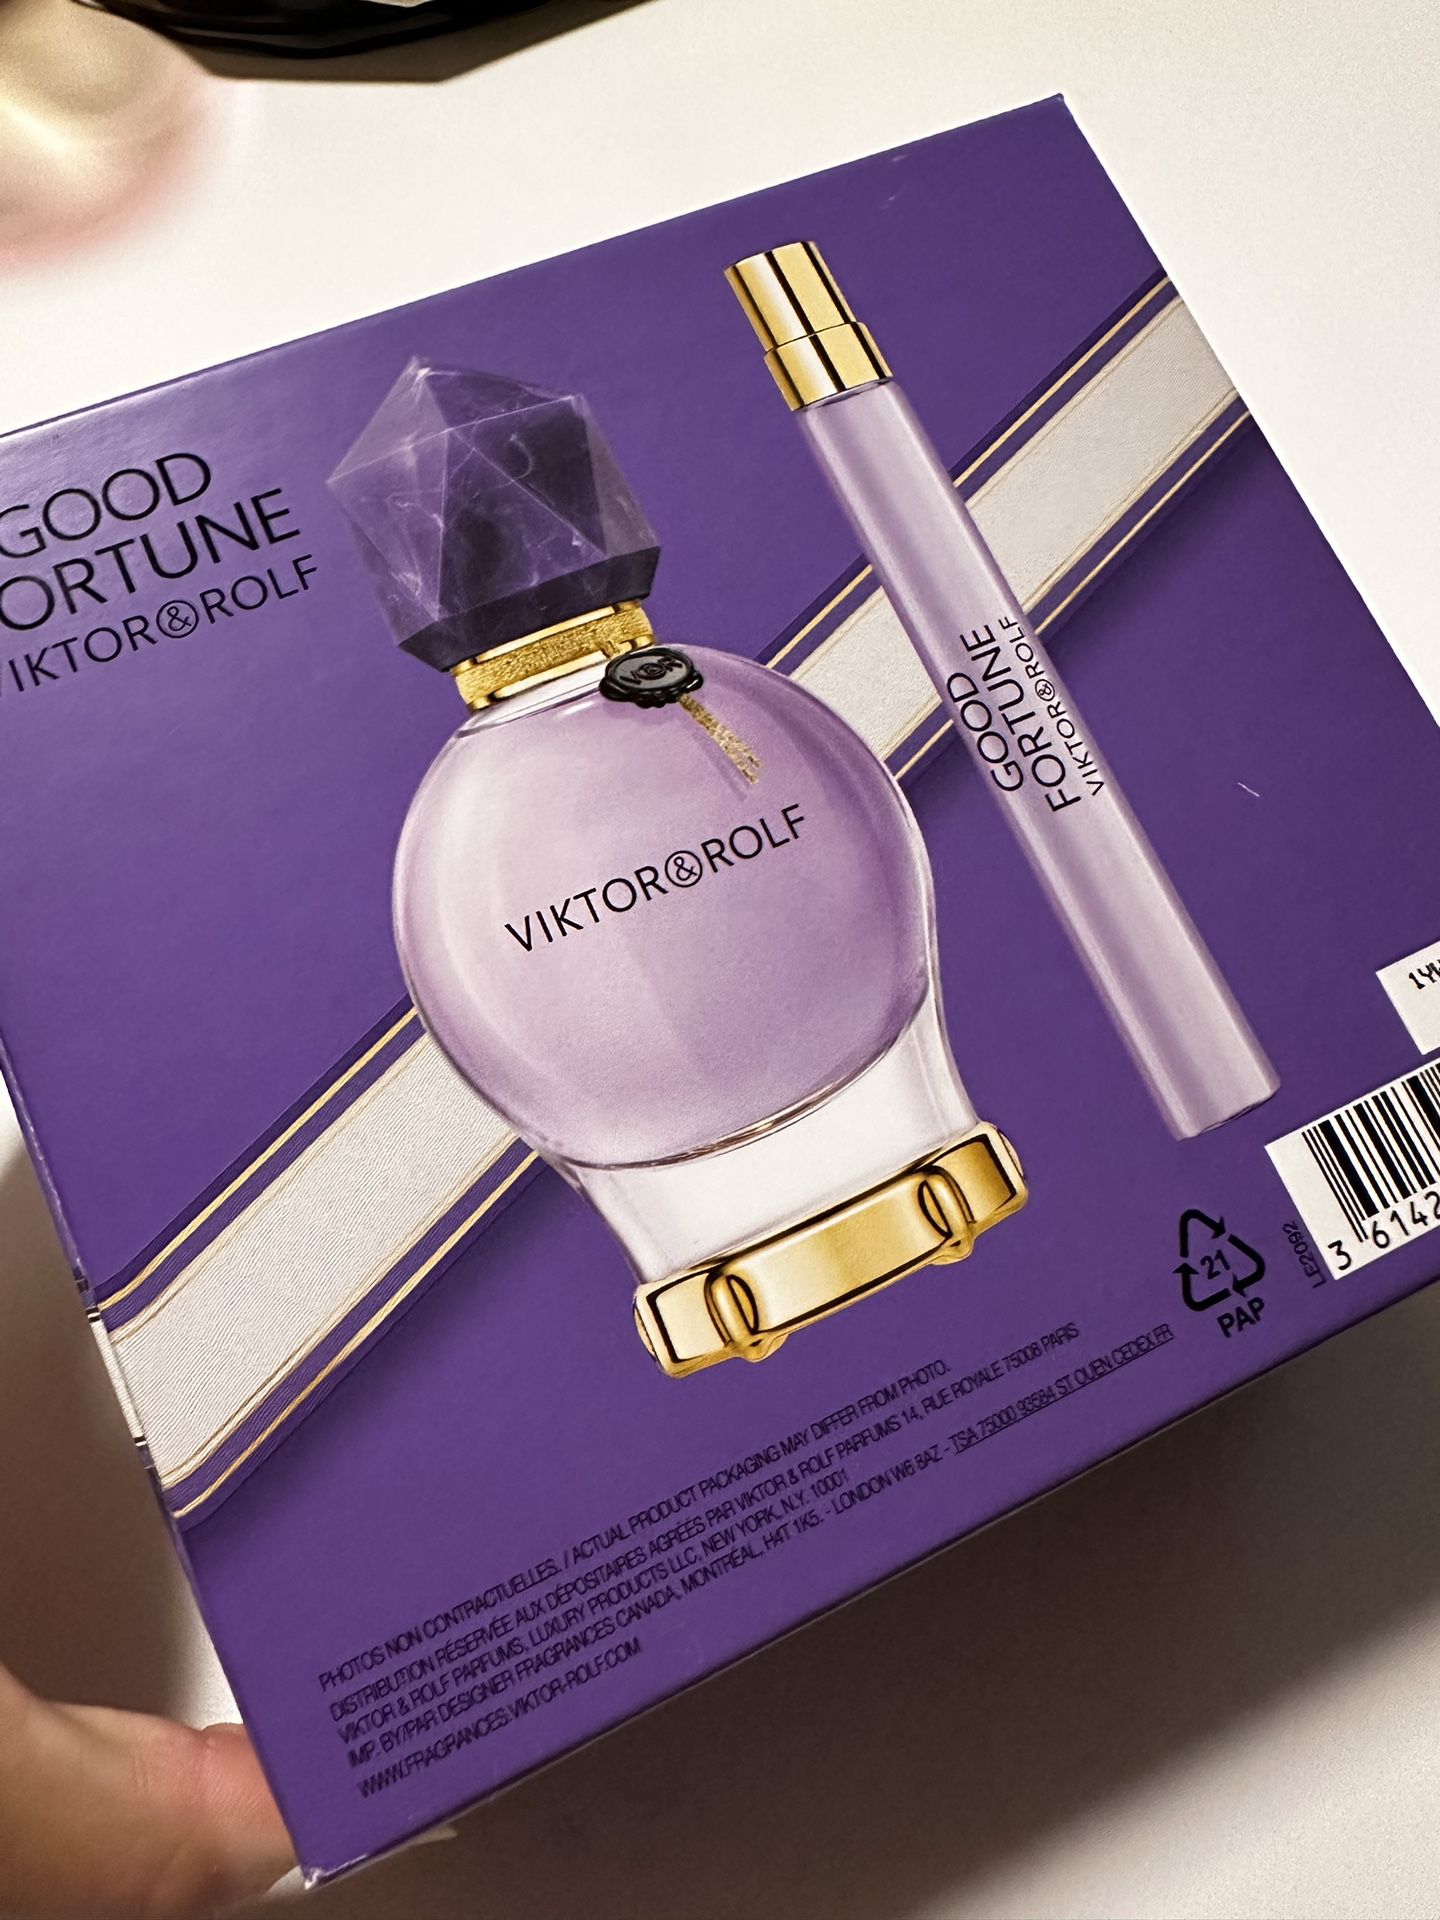 GOOD FORTUNE Perfume - 2 In 1 Deal 